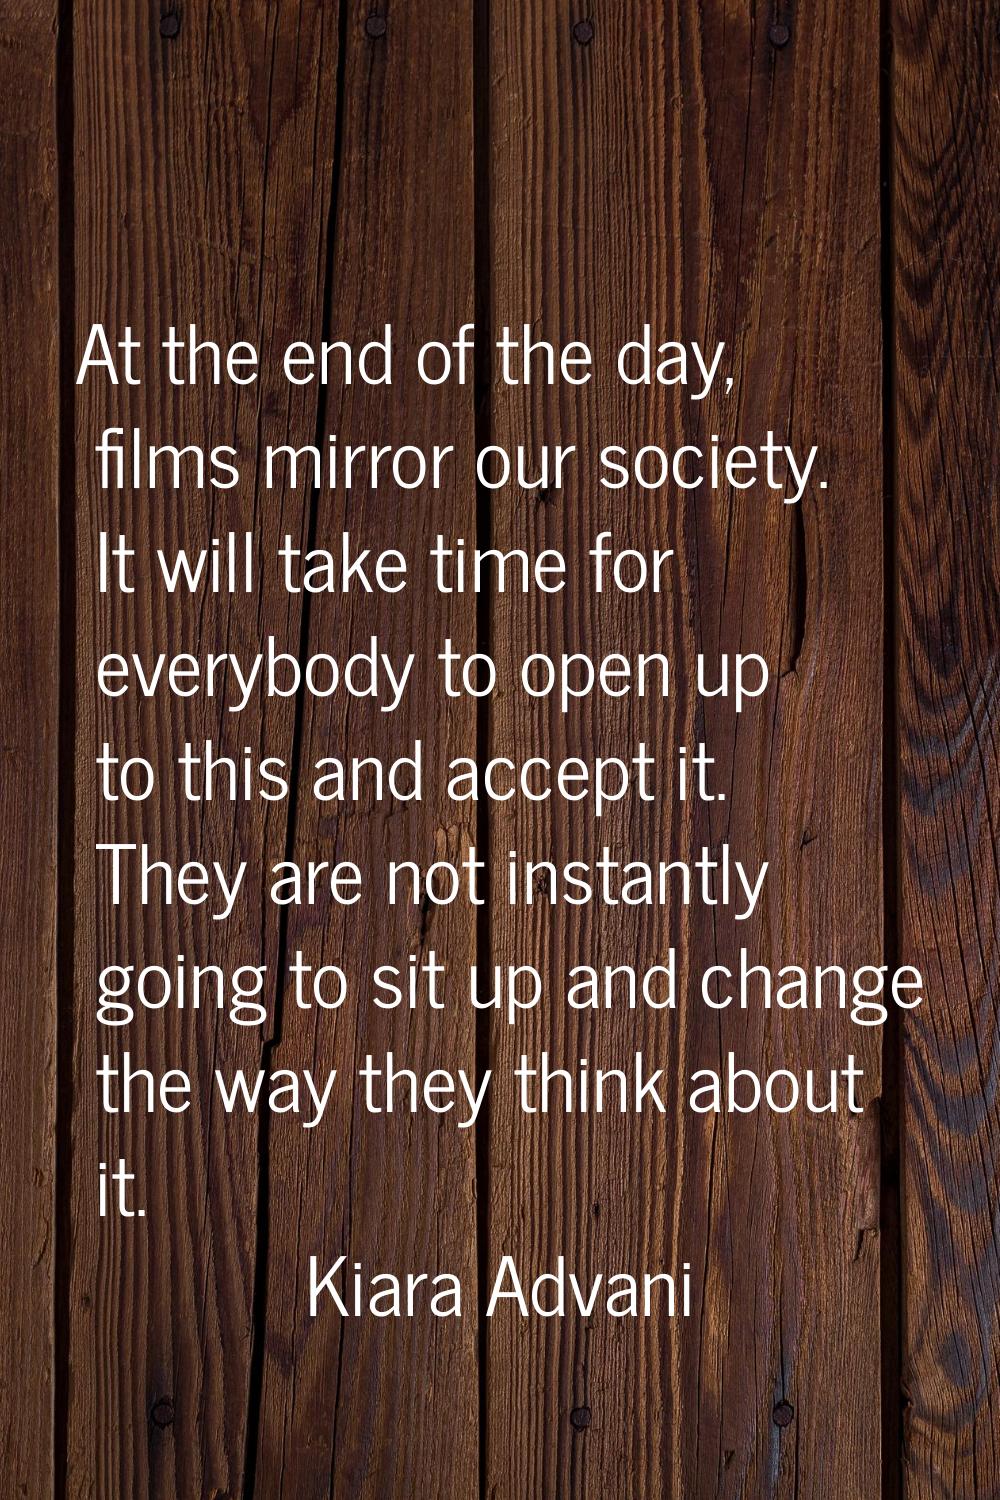 At the end of the day, films mirror our society. It will take time for everybody to open up to this